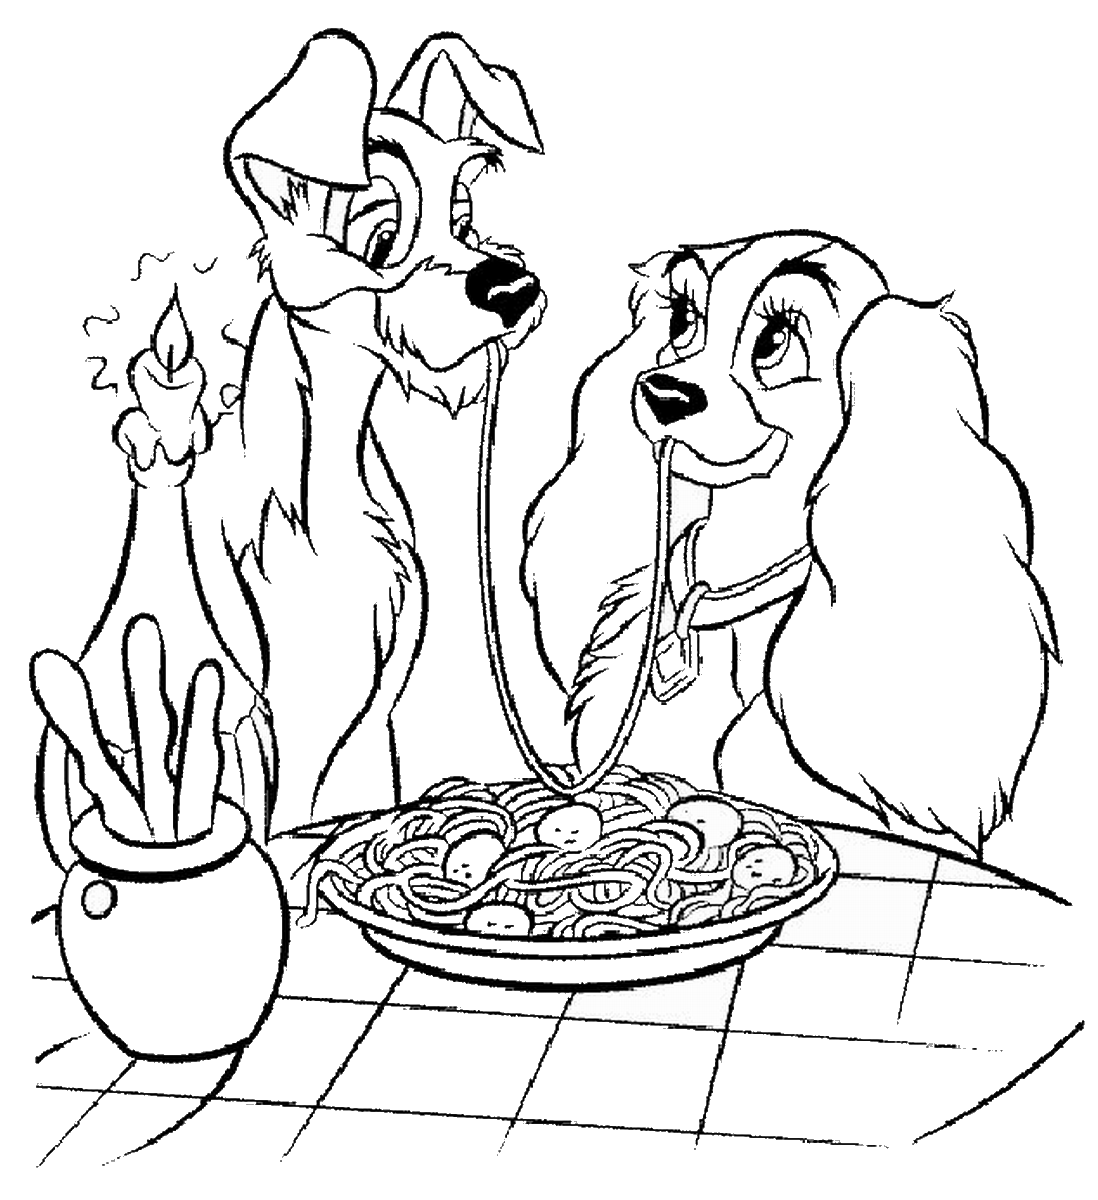 Lady and the Tramp Coloring Pages. 